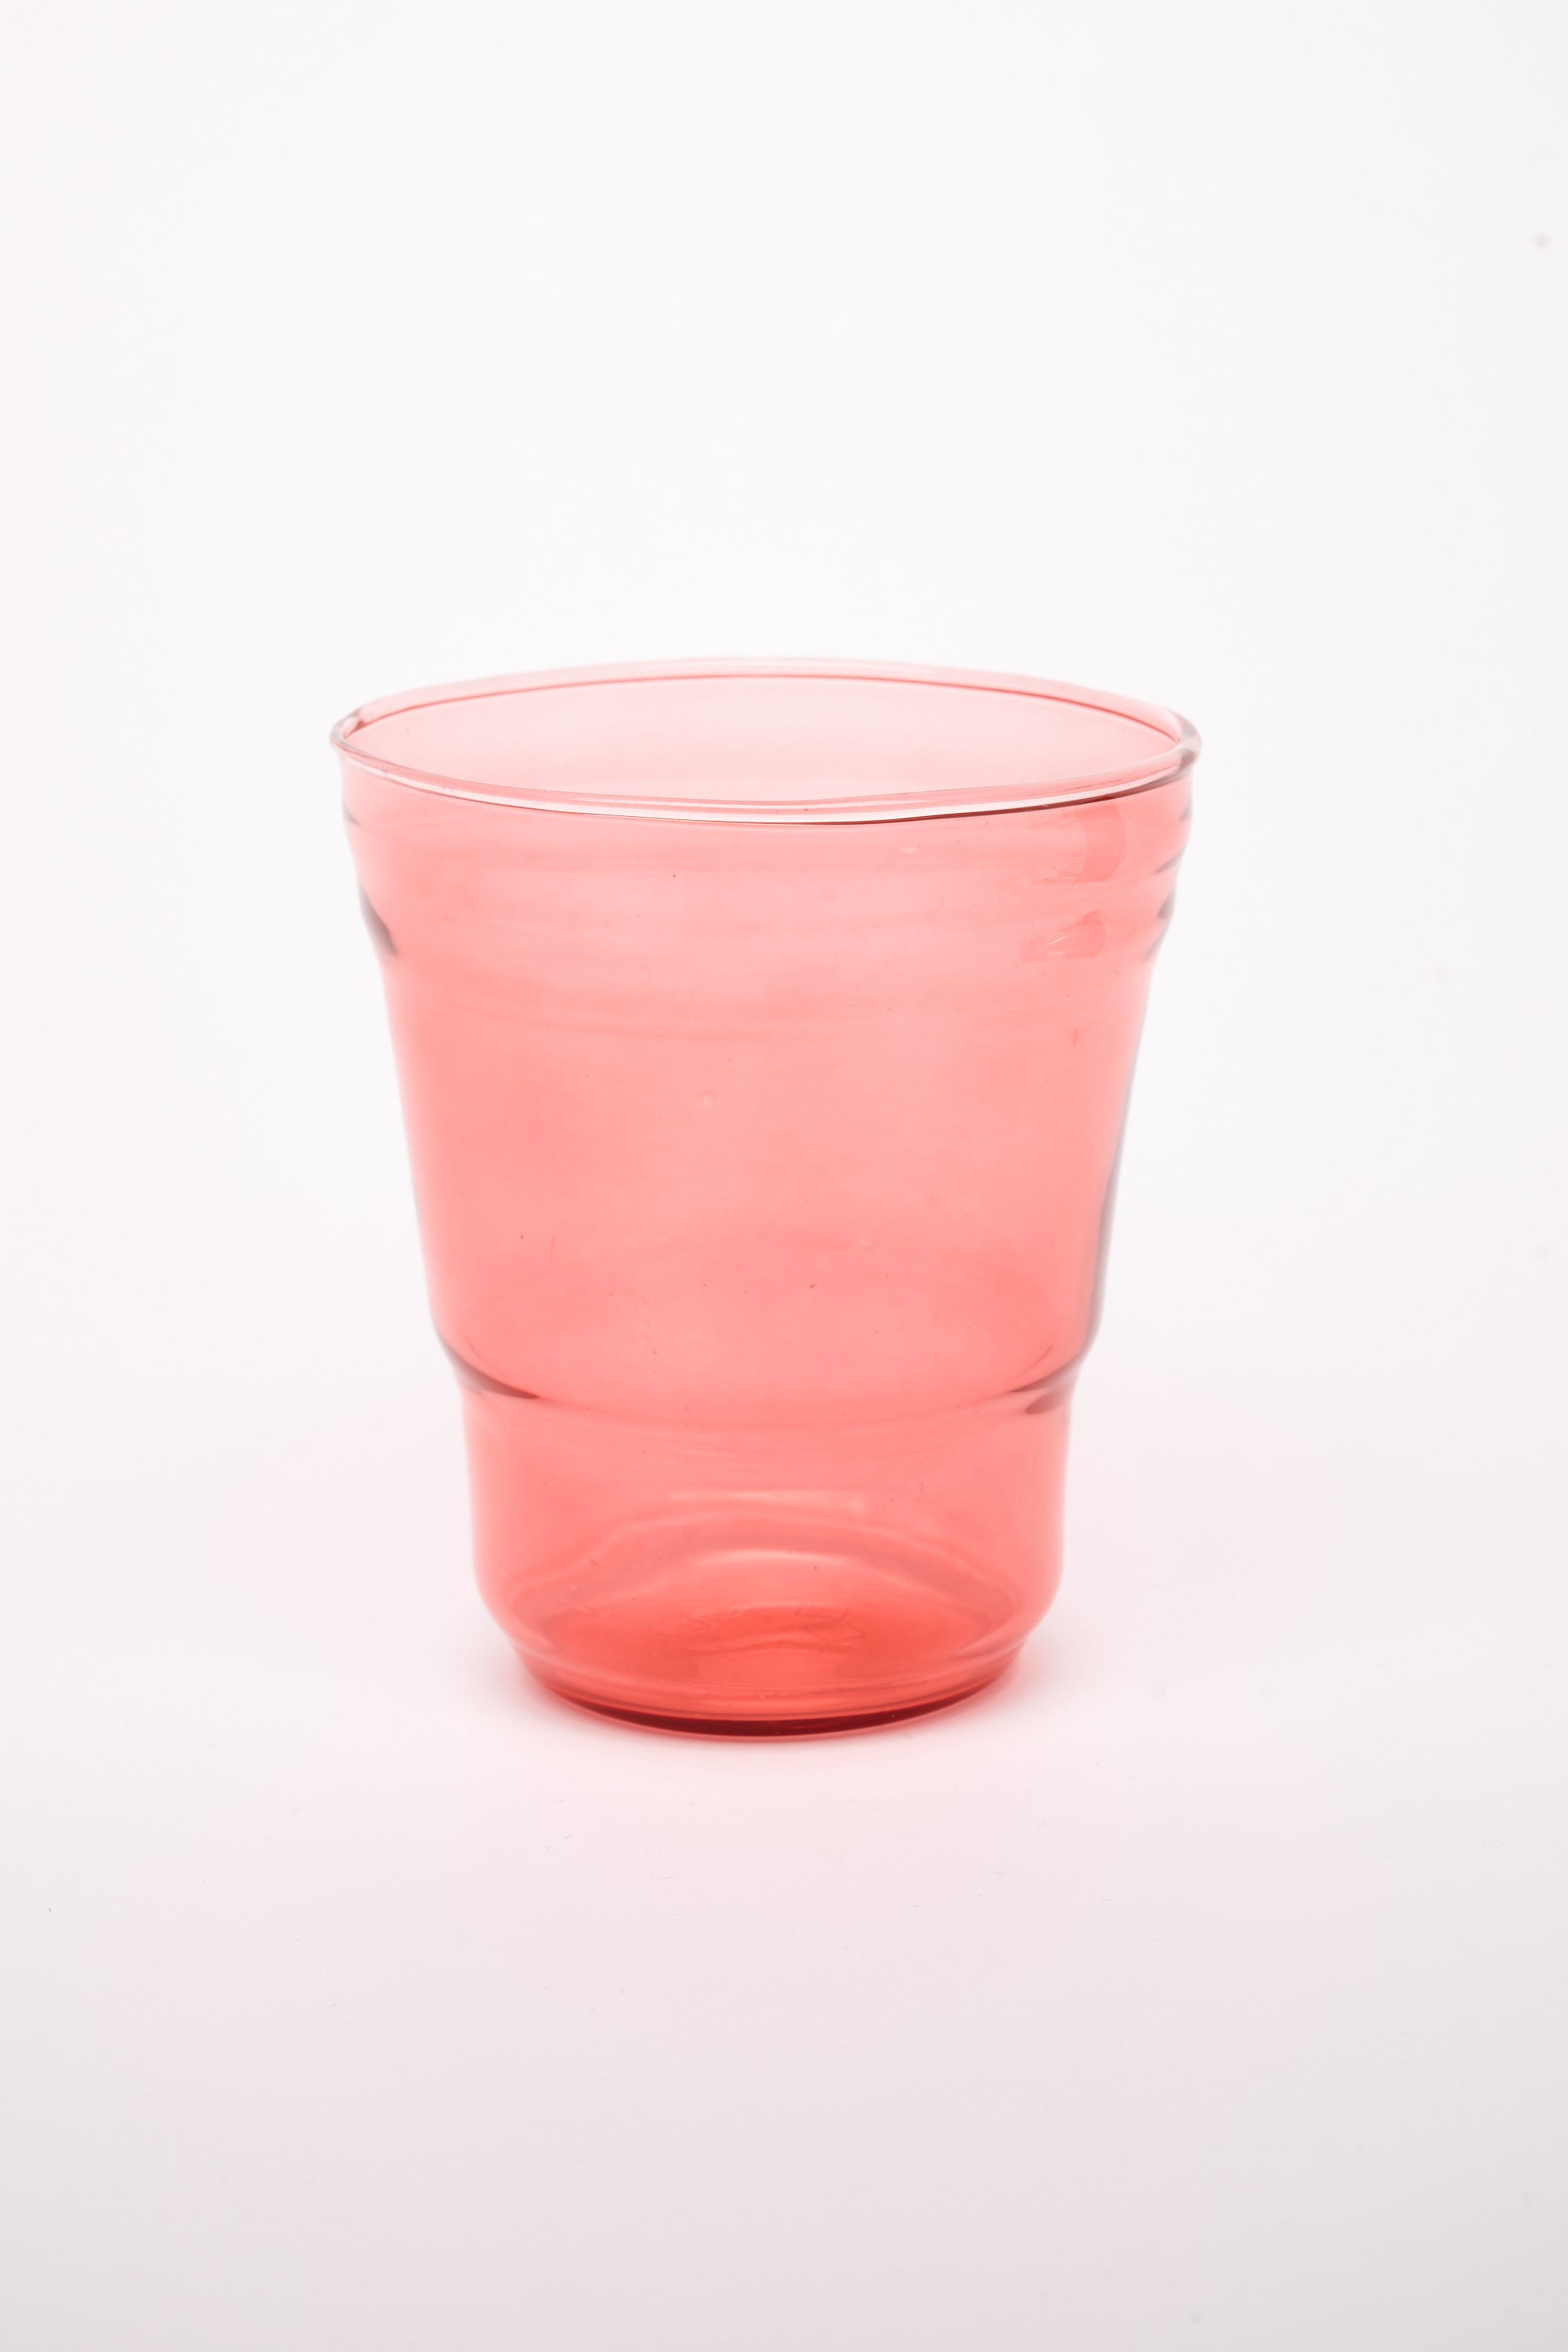 Fantastic-Not-Plastic Tall Glasses in Peony